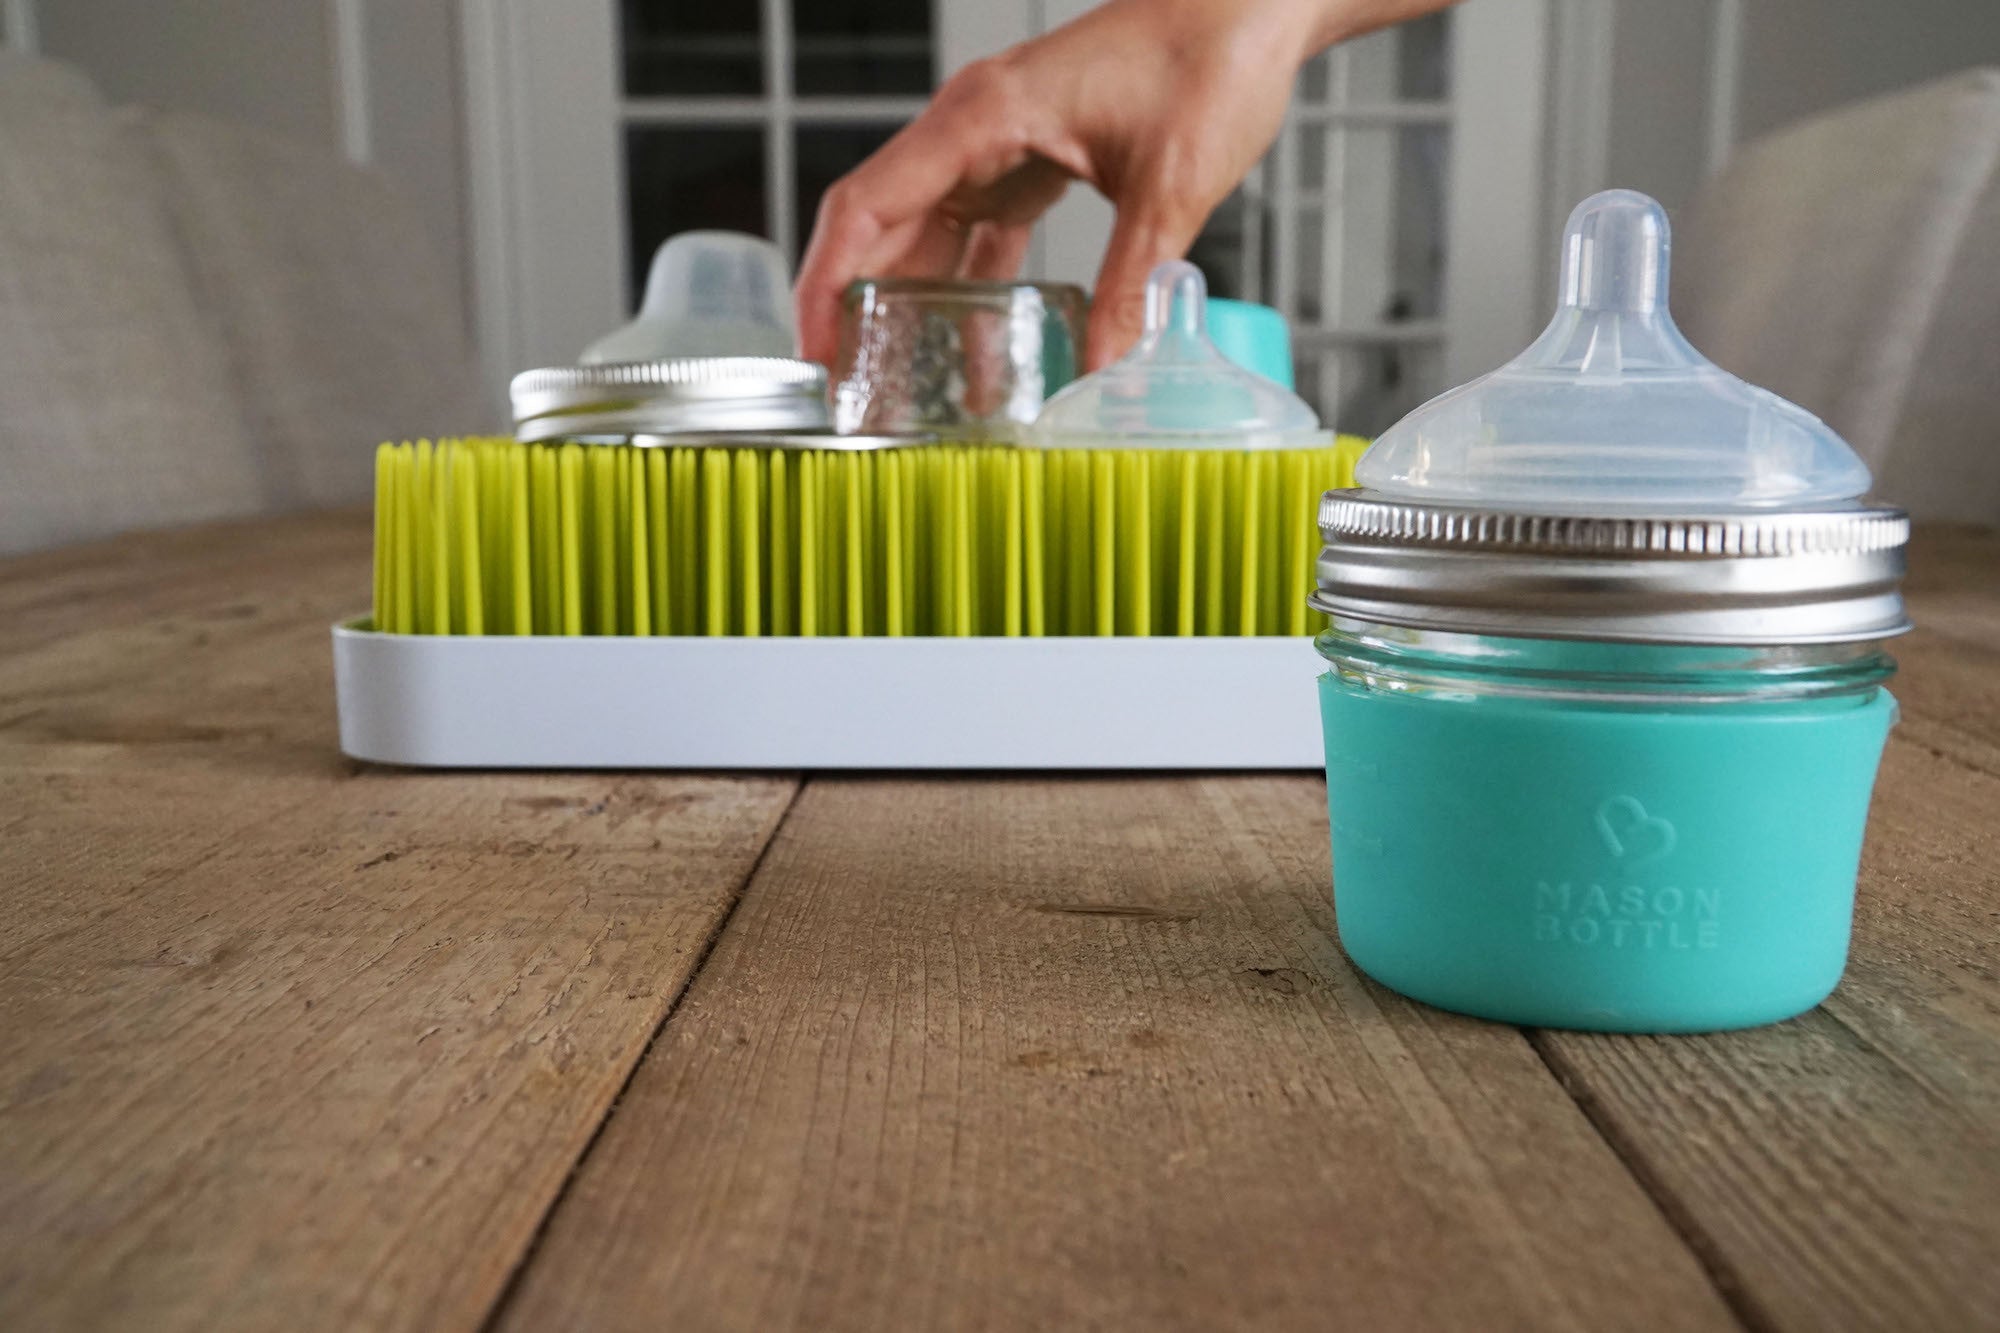 How to Sterilize Baby Bottles Naturally: Peace of Mind Guaranteed